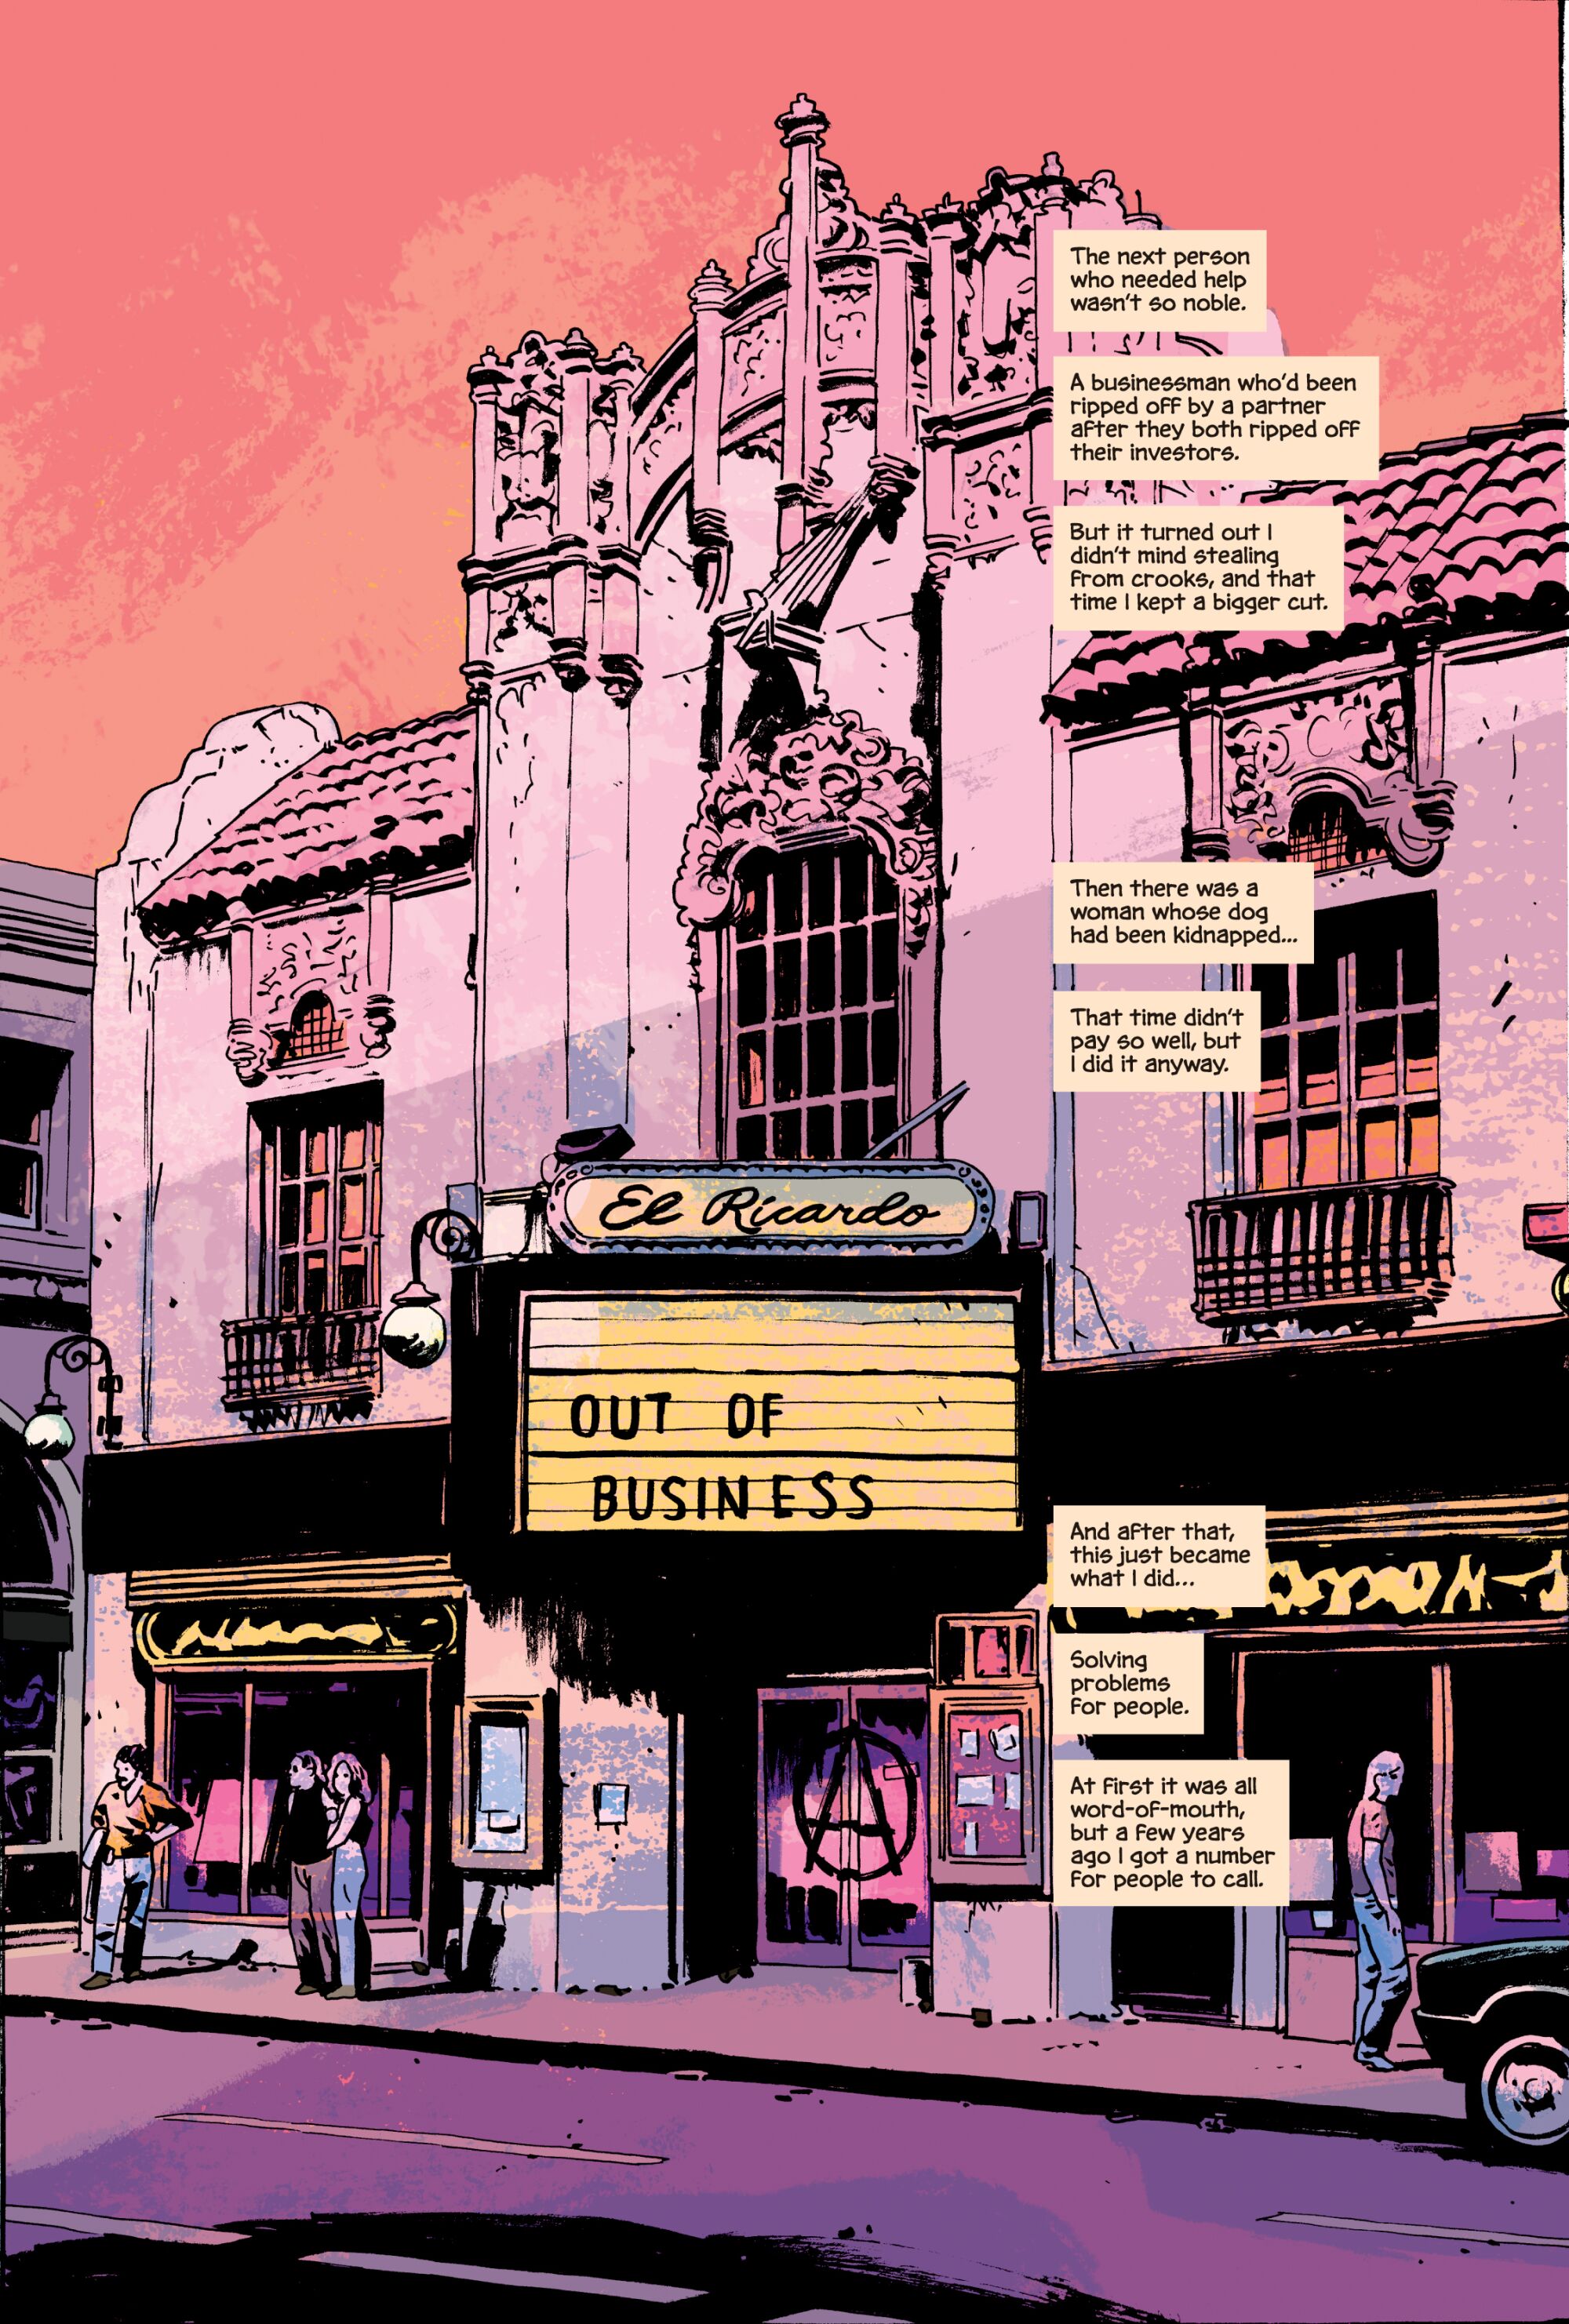 A page from "The Ghost in You" by Ed Brubaker and Sean Phillips